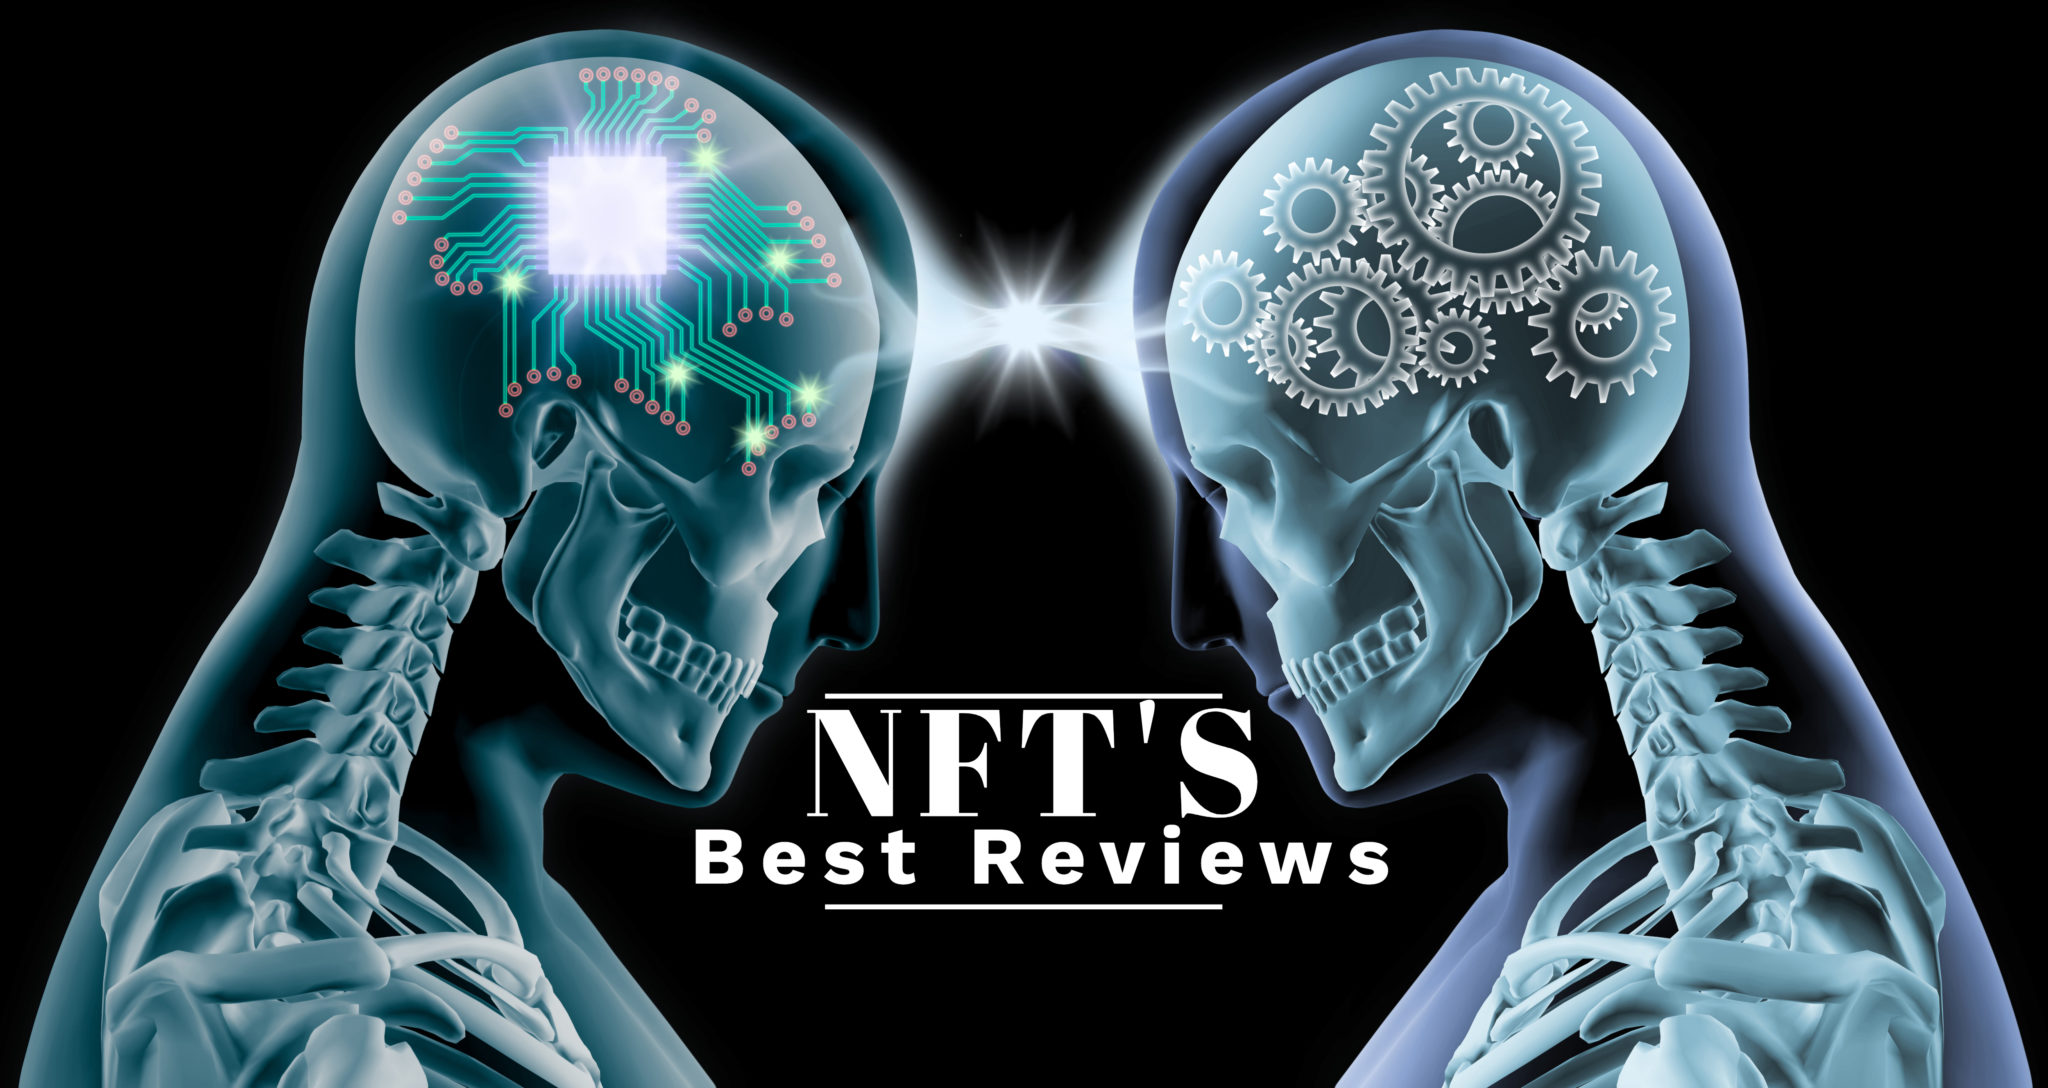 WHAT MAKE NFT'S SO UNIQUE AND SPECIAL ? - Best NFT Reviews